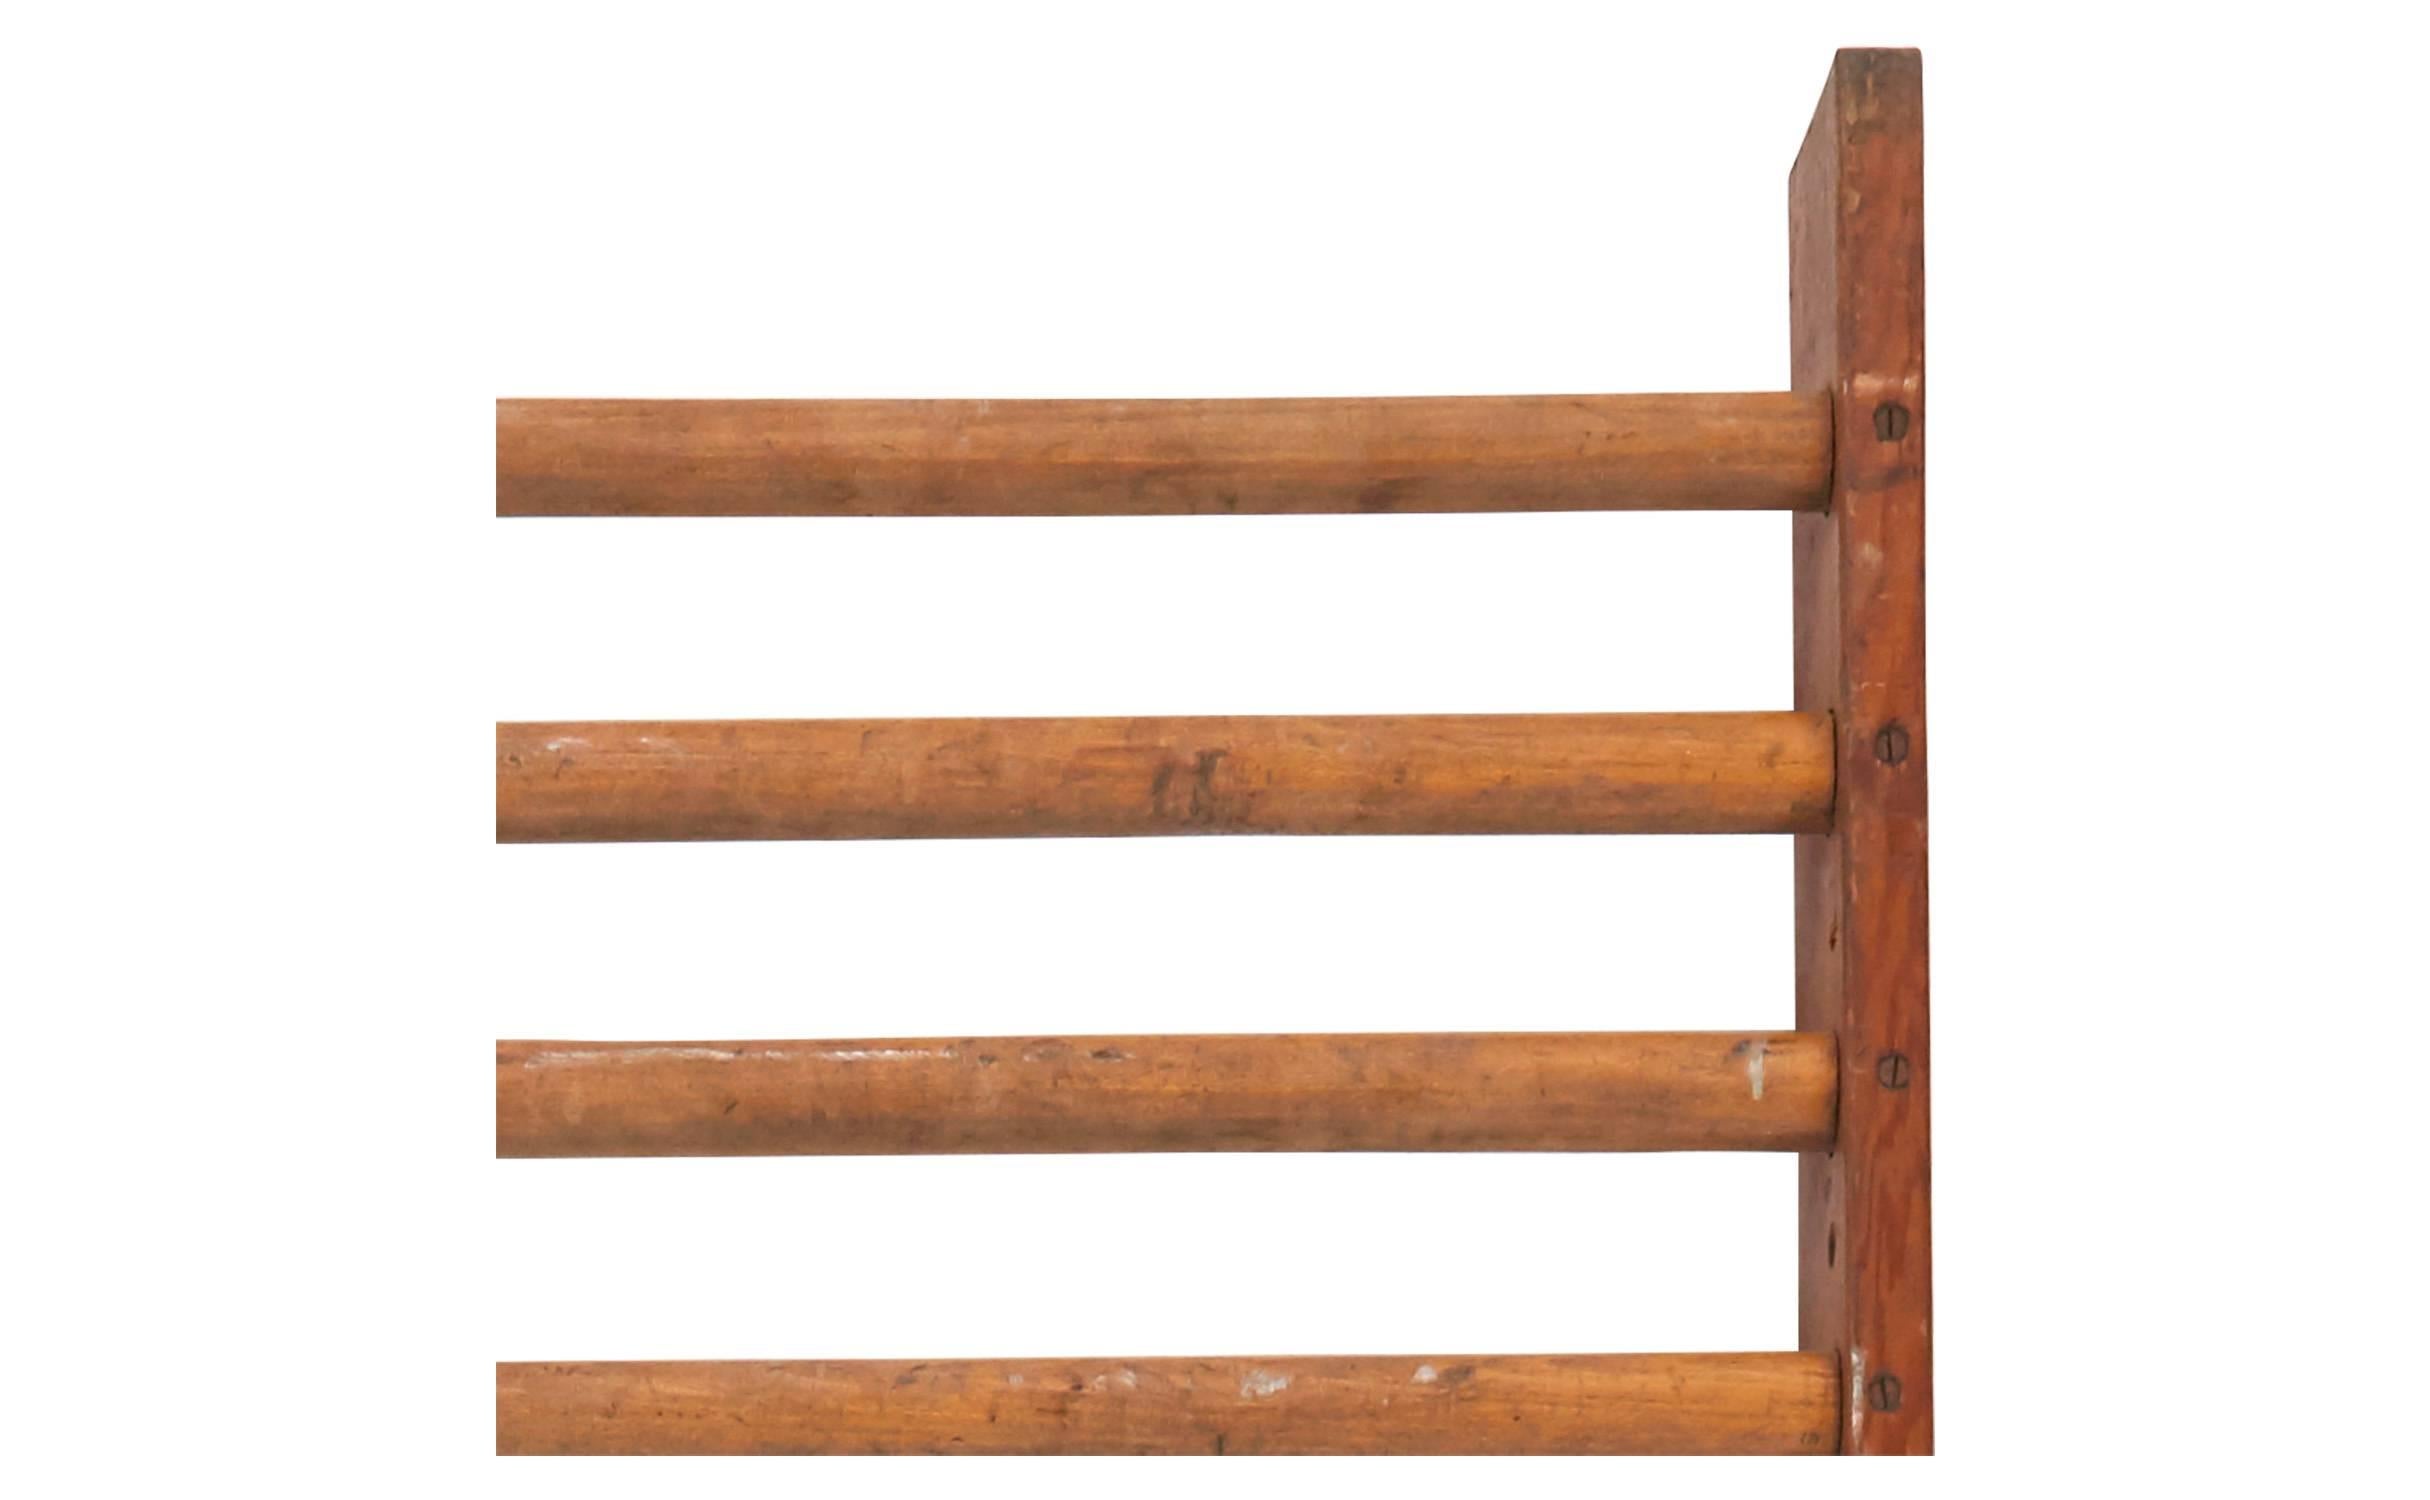 • American made wooden ladder
• 20th century
• Measures: 35.5'W x 5'D x 118'H